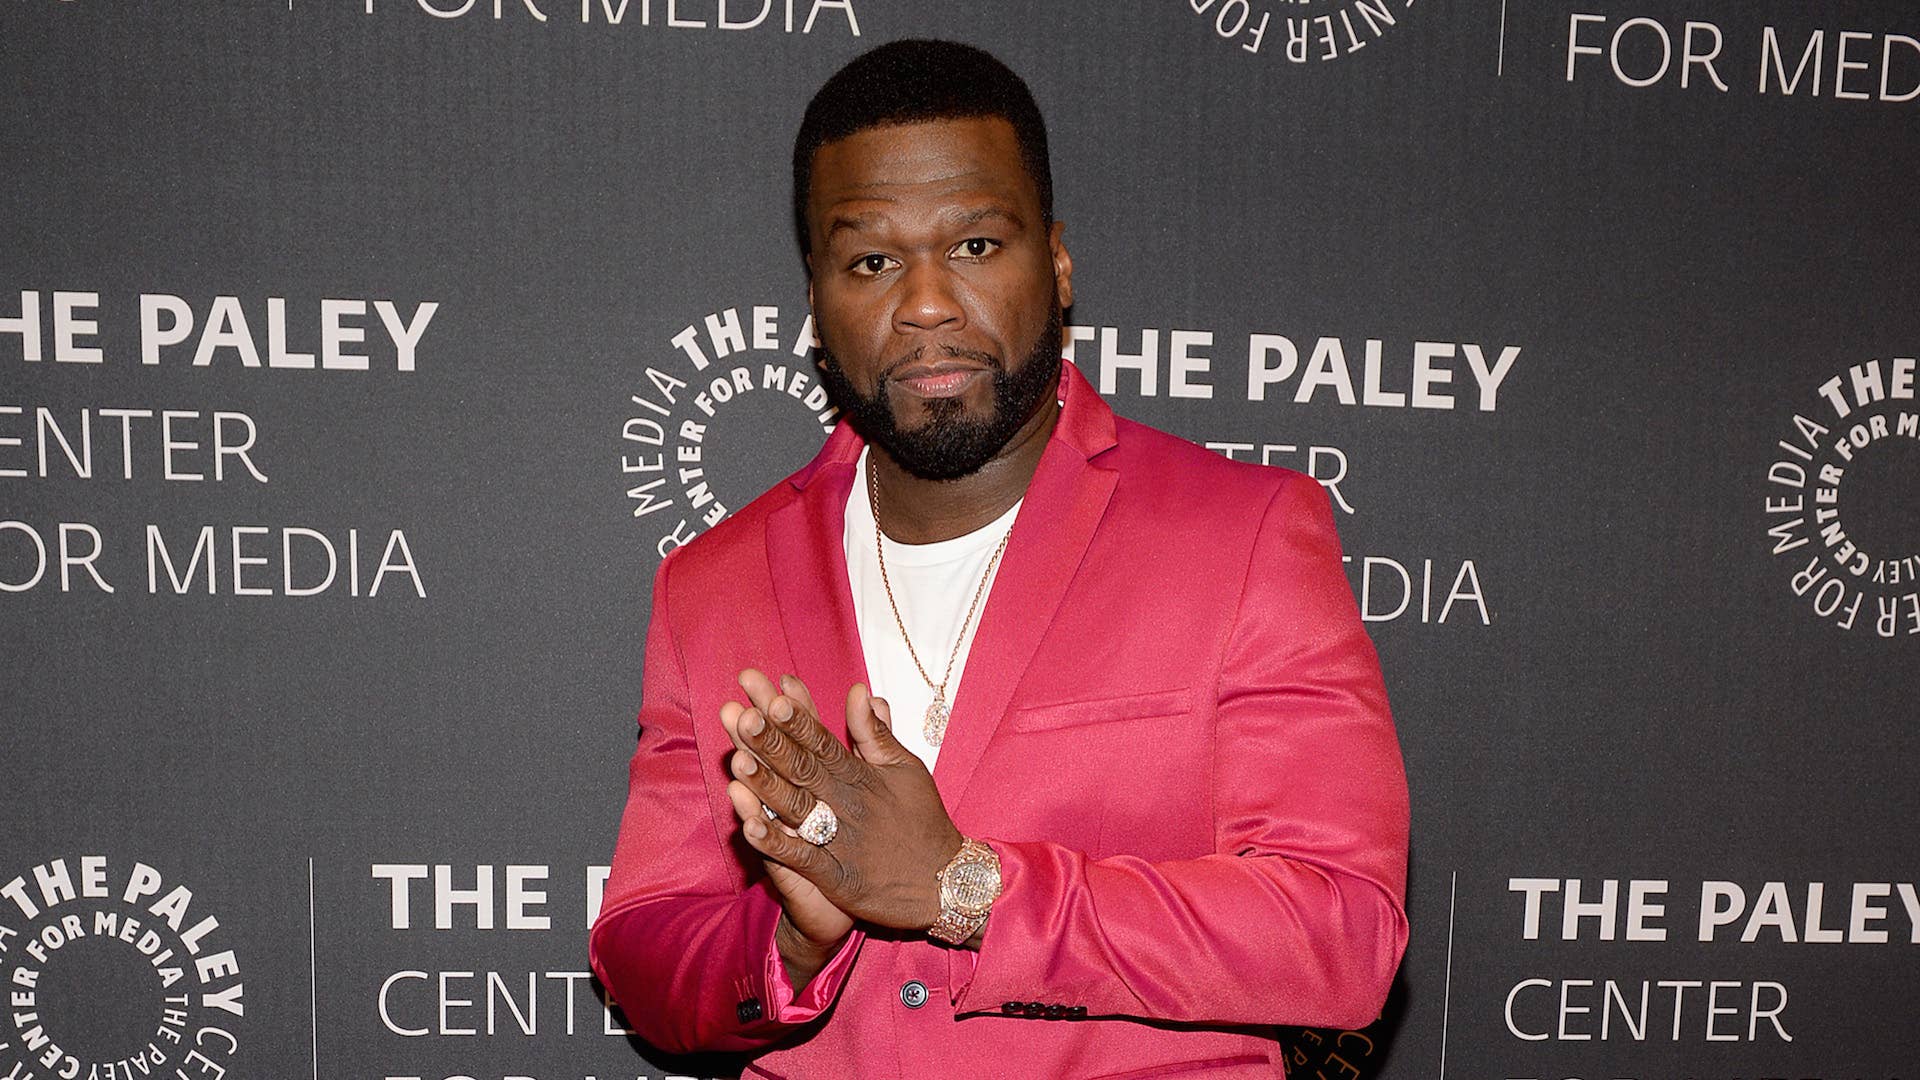 Curtis "50 Cent" Jackson attends the Power Series Finale Episode Screening